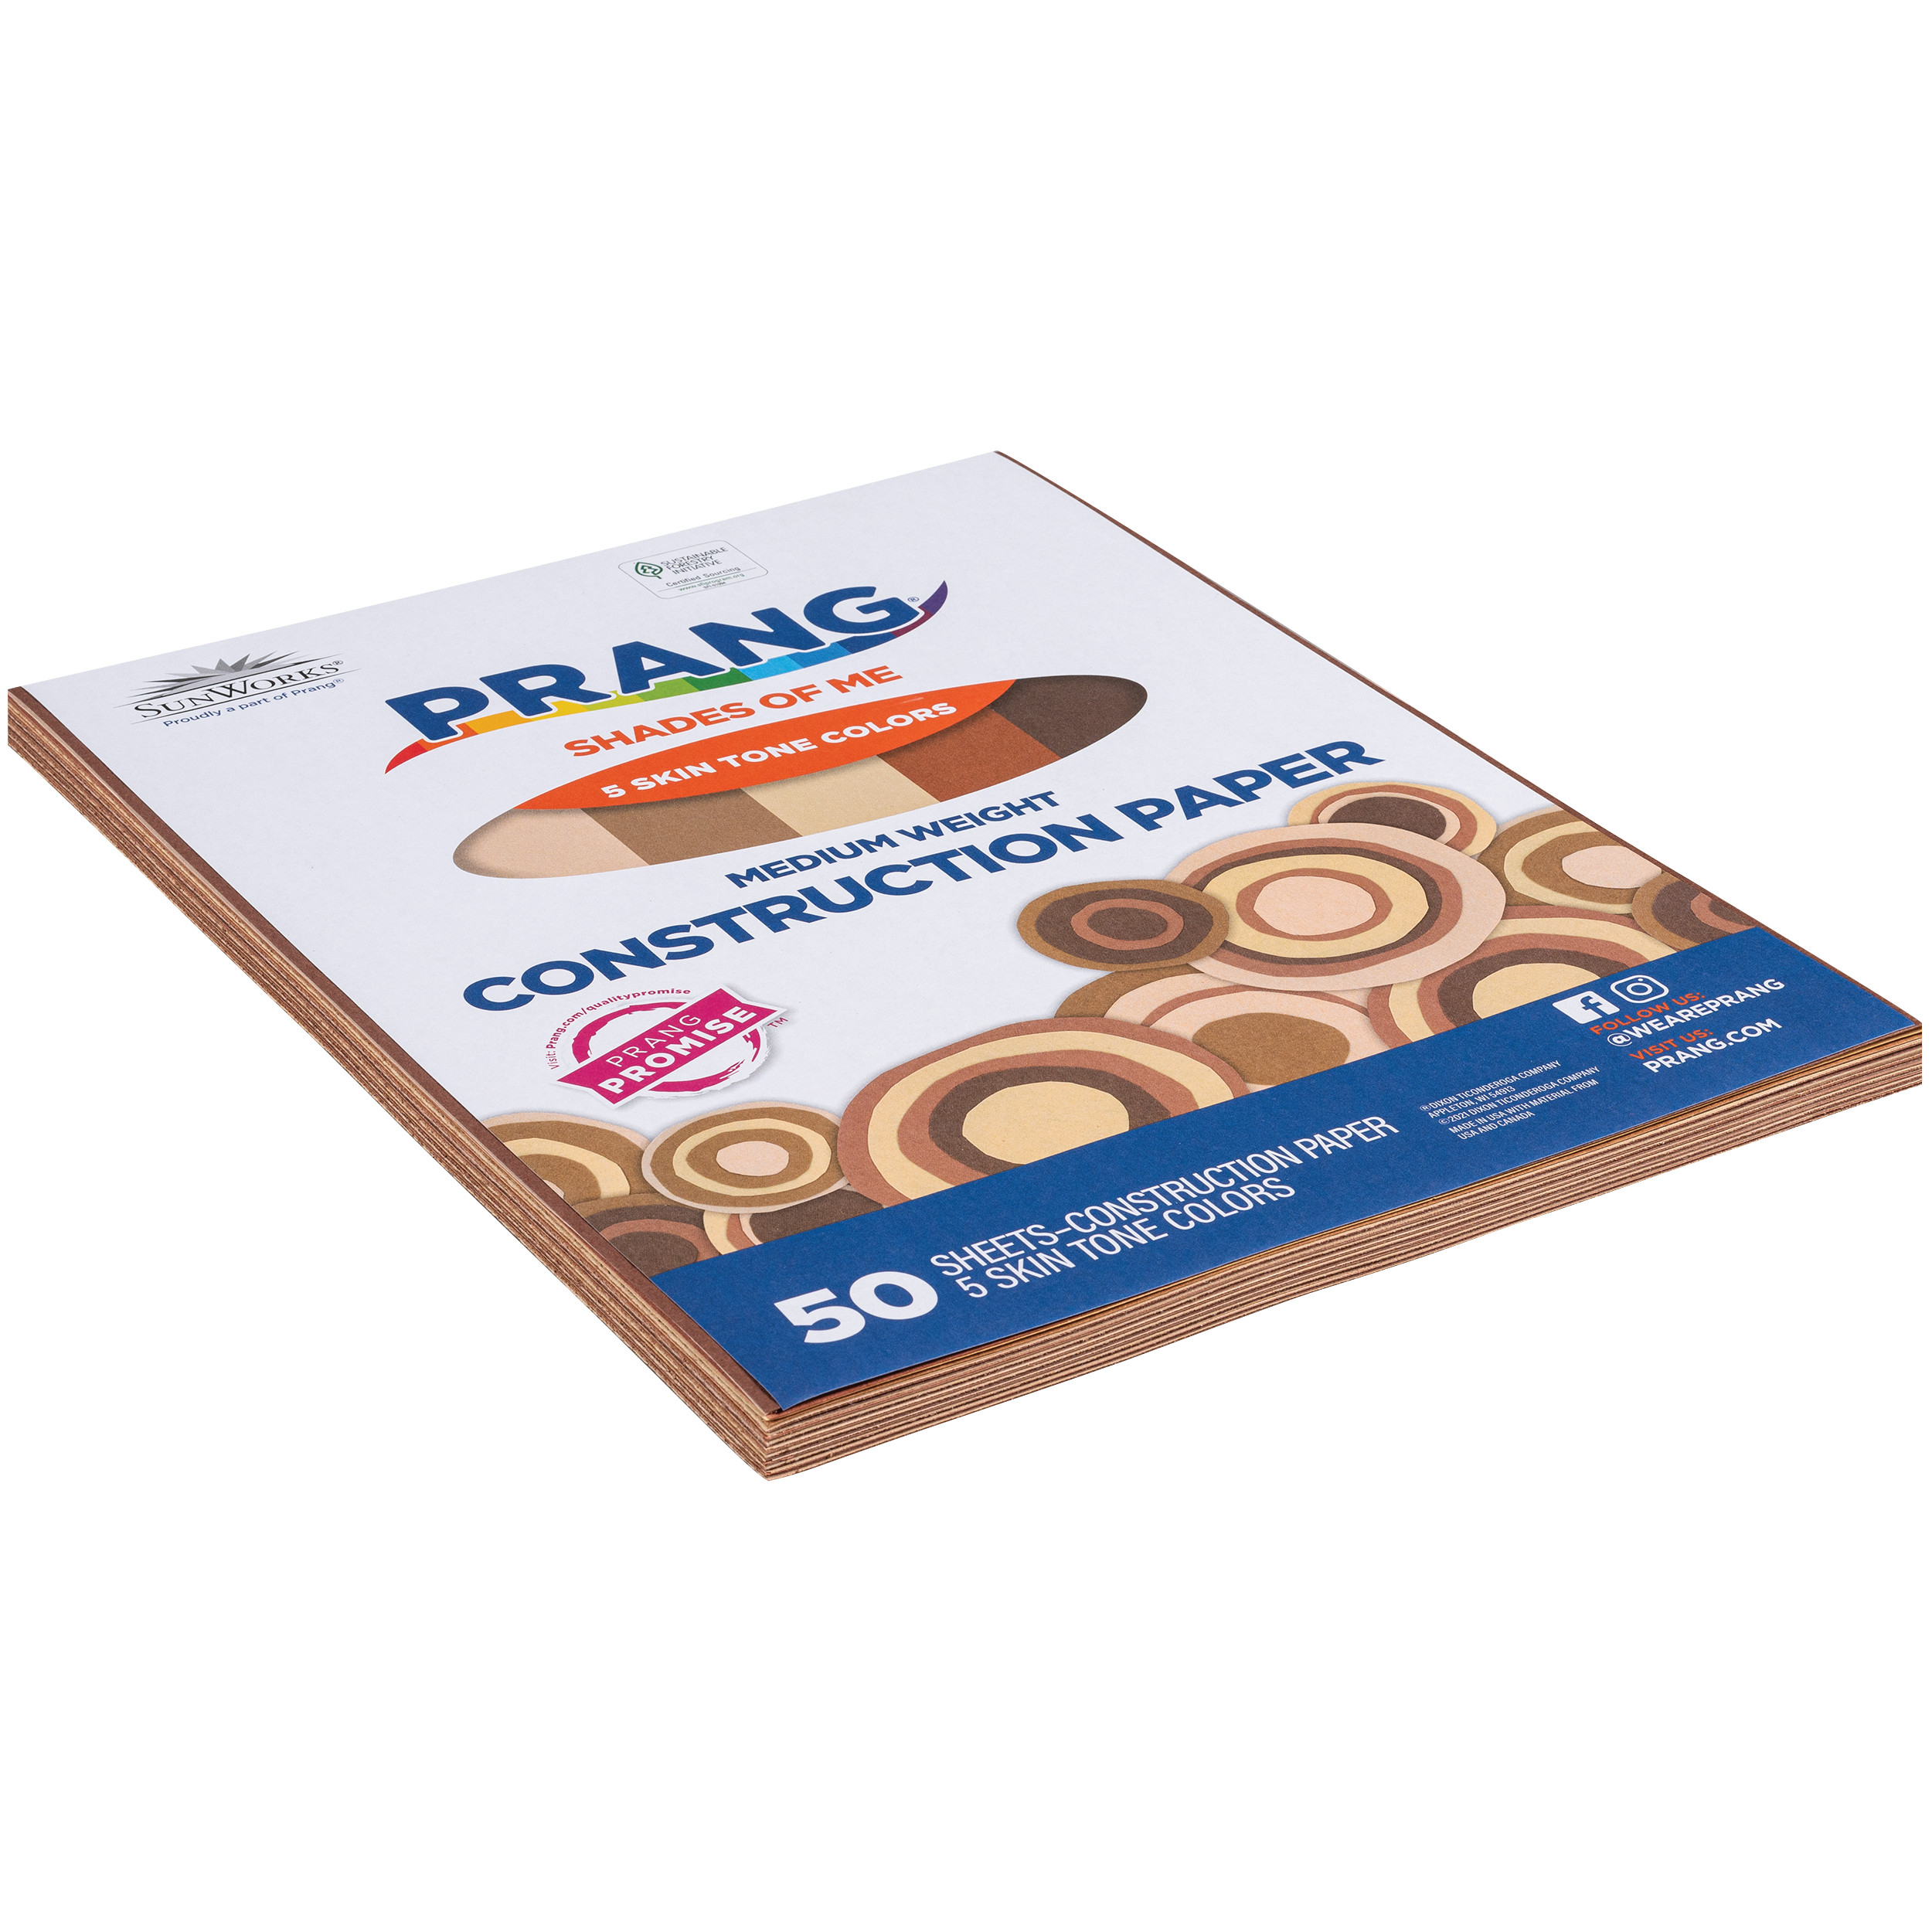 Smart Stack™ Construction Paper - Pacon Creative Products